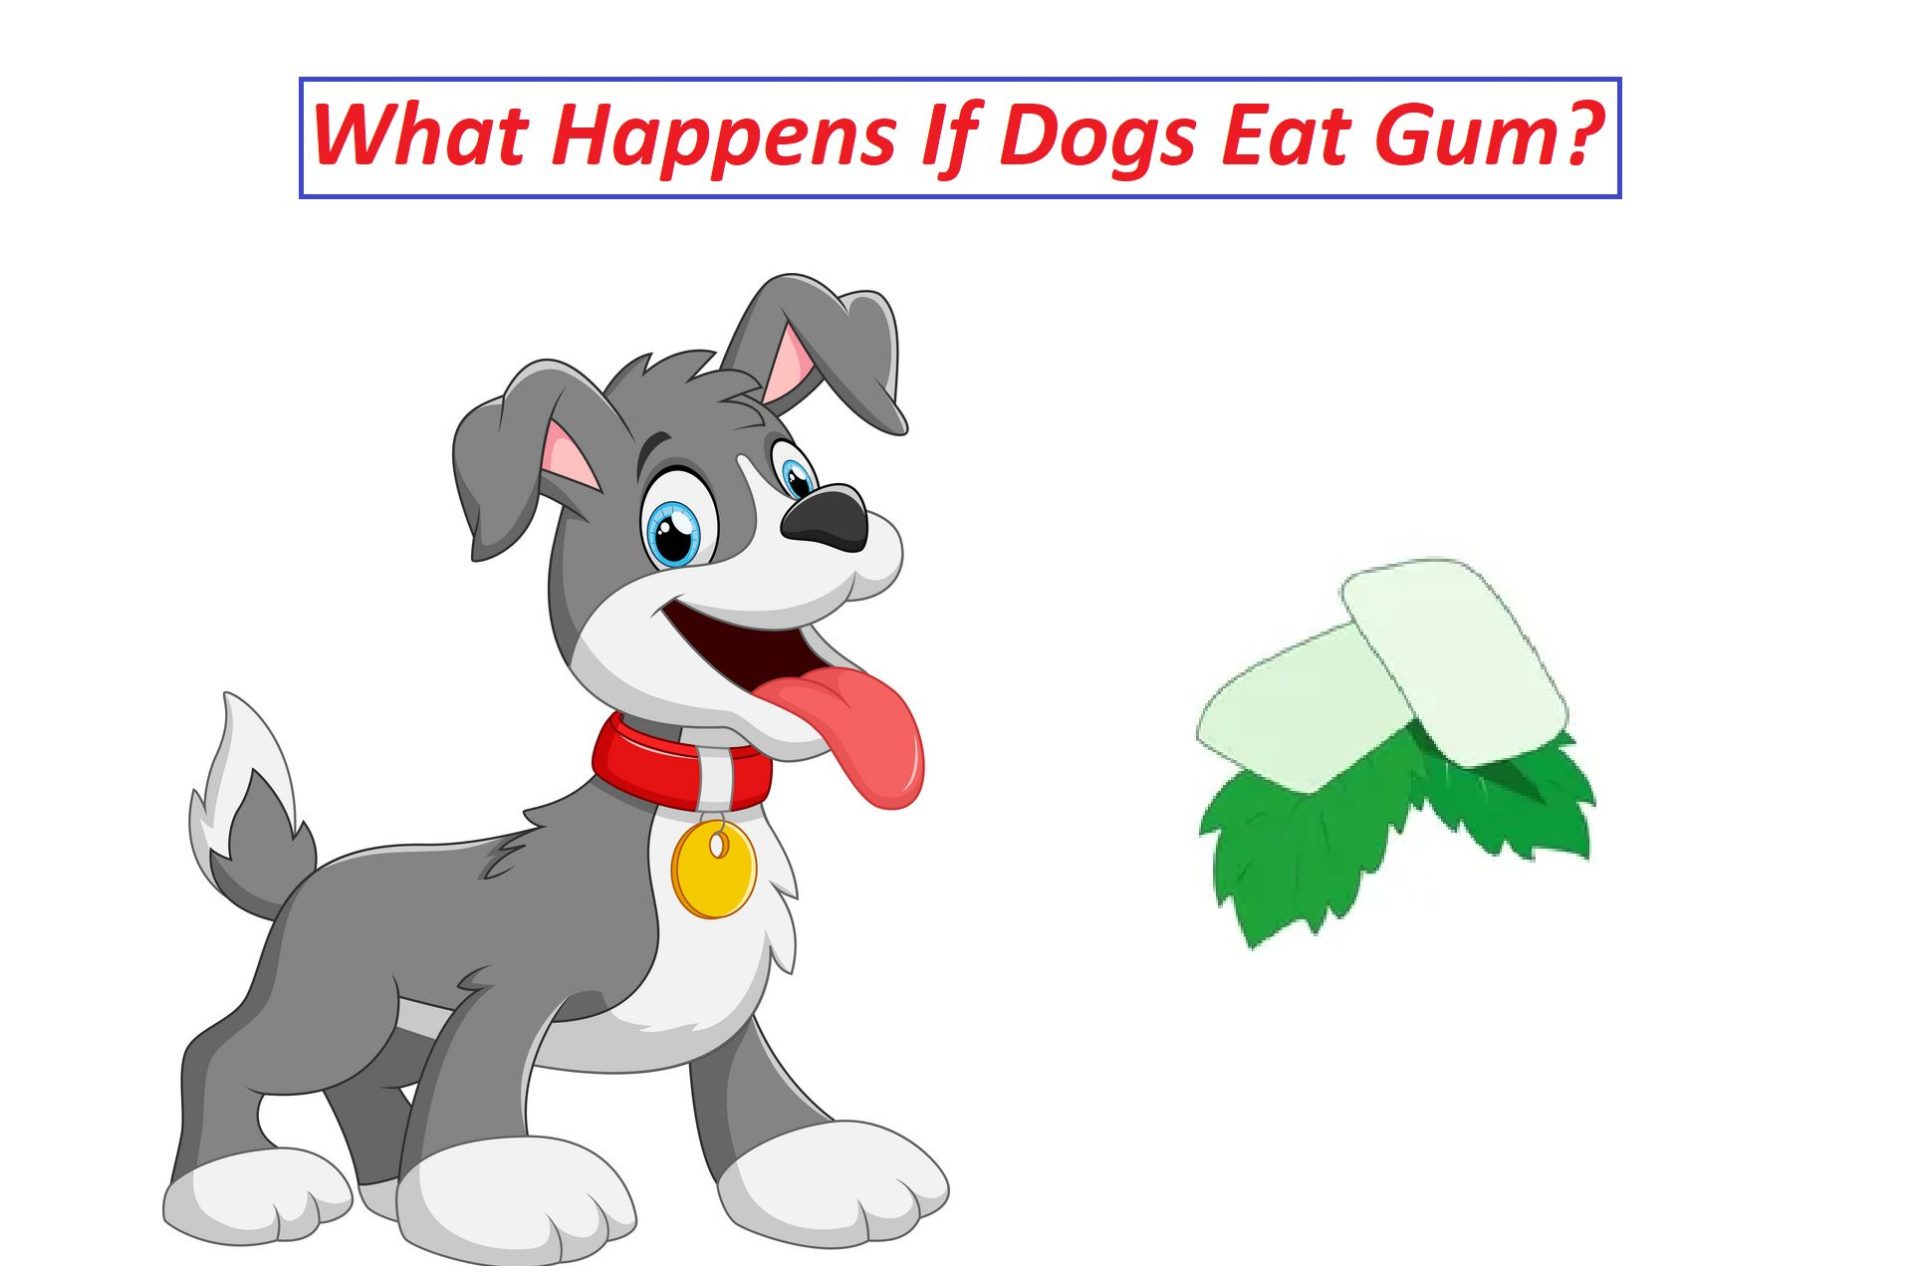 What Happens If Dogs Eat Gum?